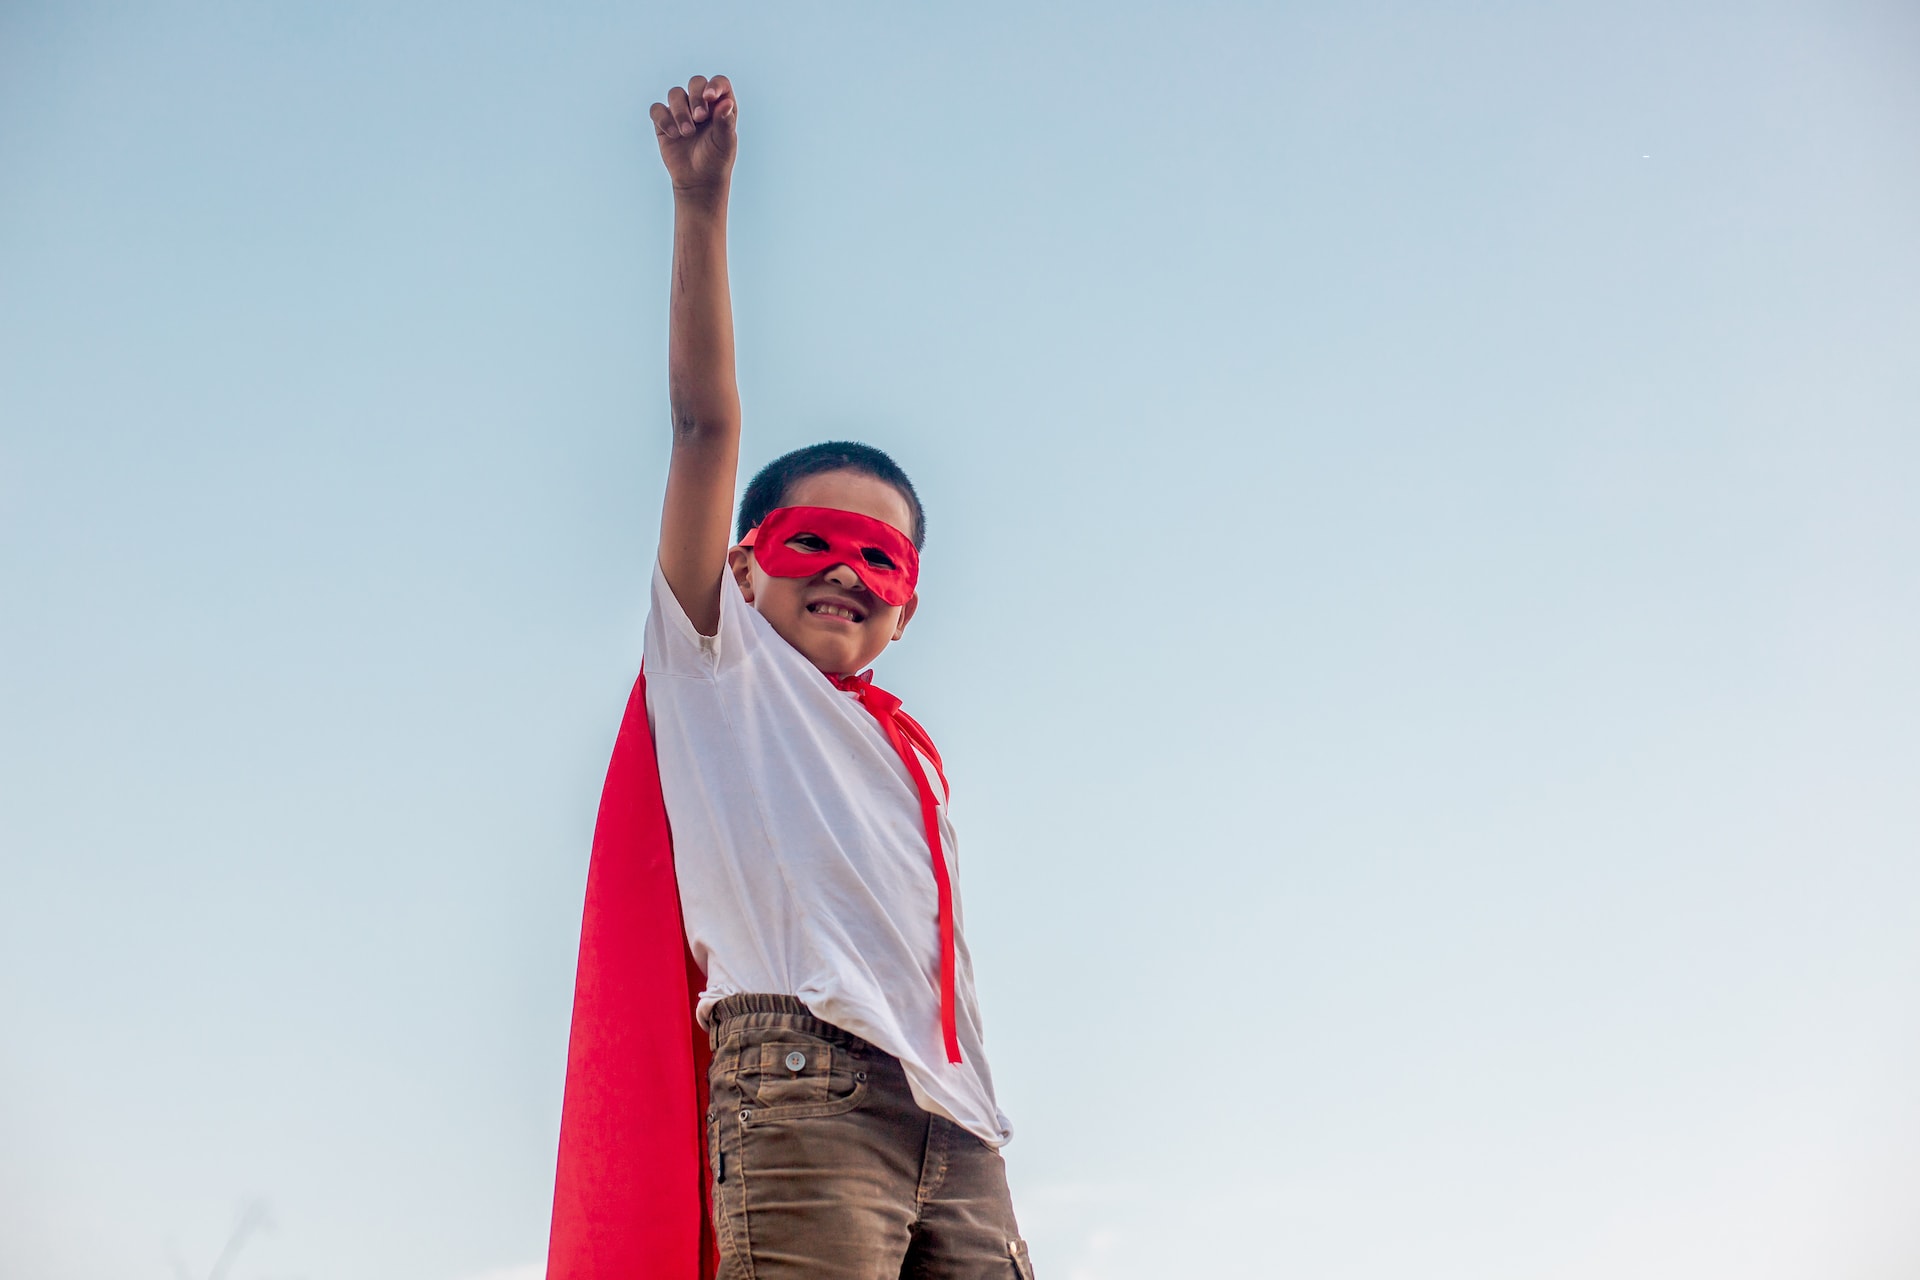 Samuel, an 8-year-old boy from Bolivia, is wearing a white shirt, gray jeans, and a red cape. He is standing outside with one arm up in the air.